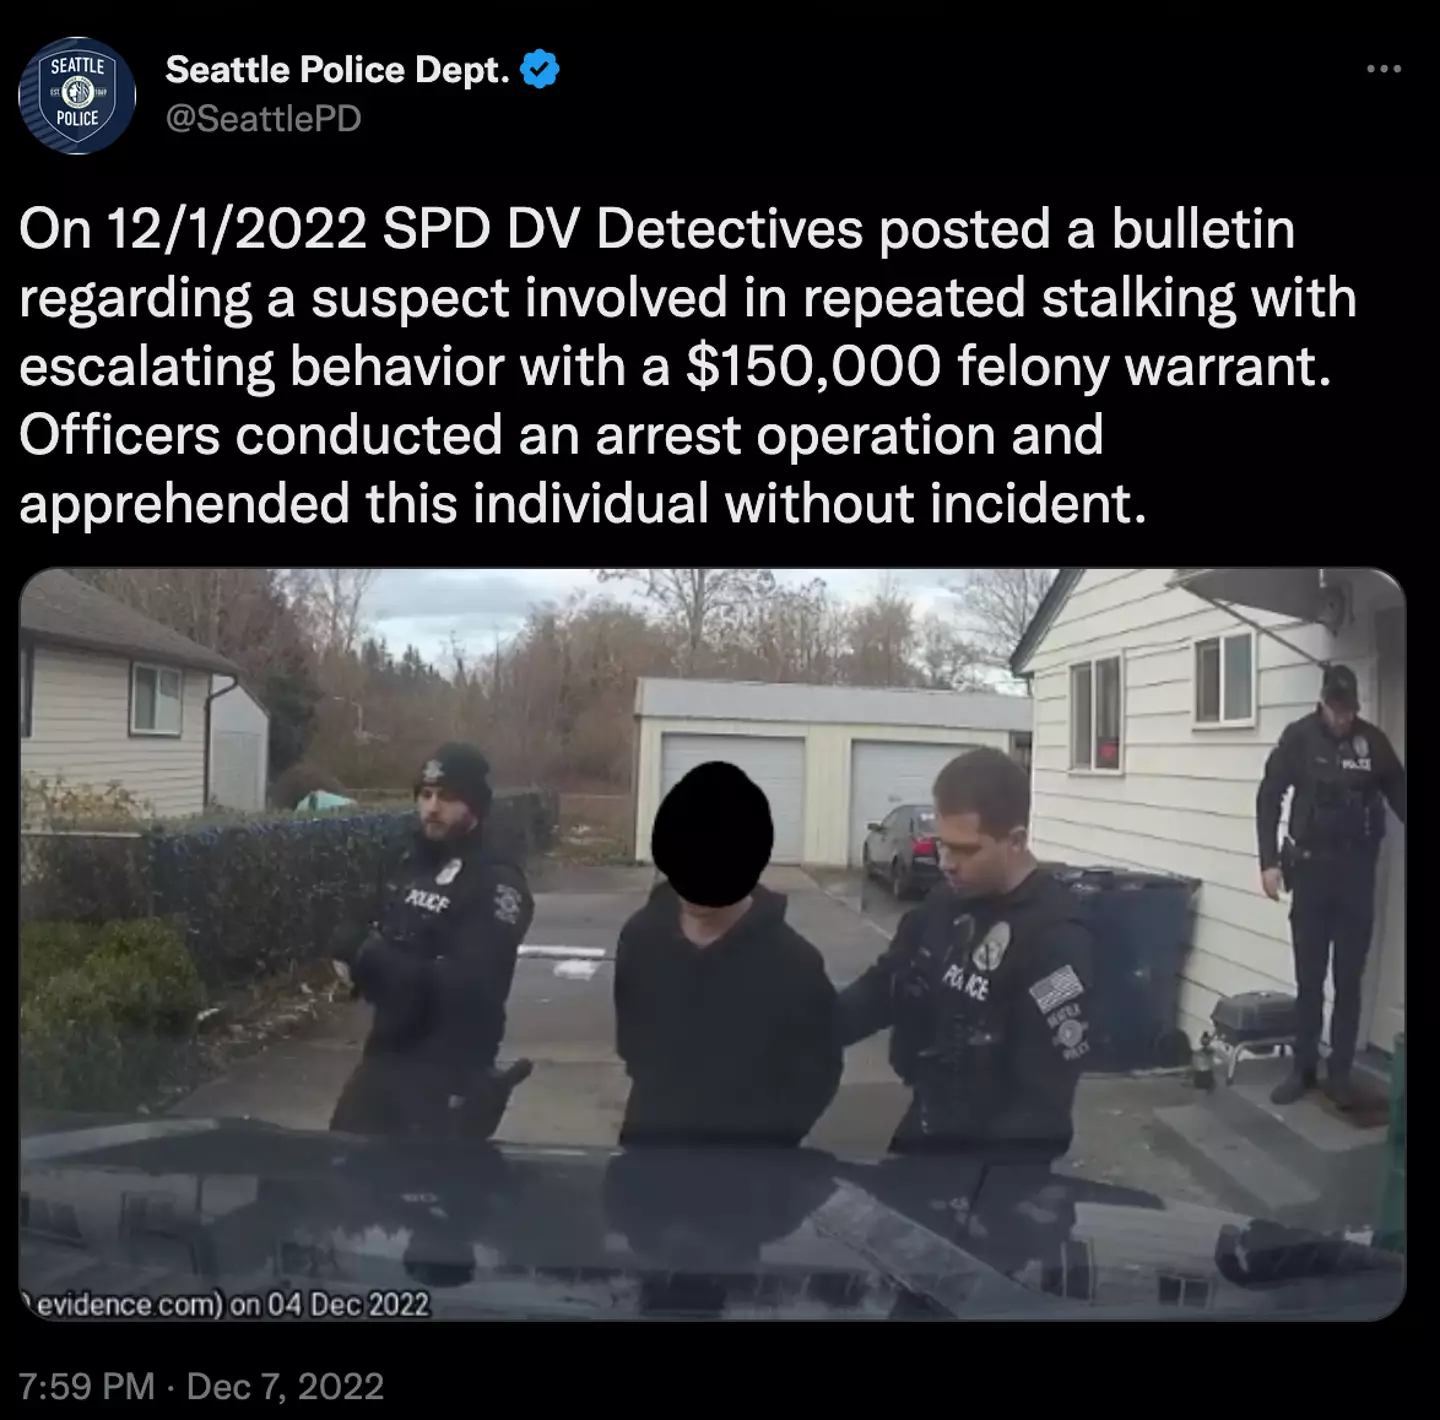 The day before the arrest of the suspected child molester, Seattle Police Department apprehended and arrested a suspected stalker.